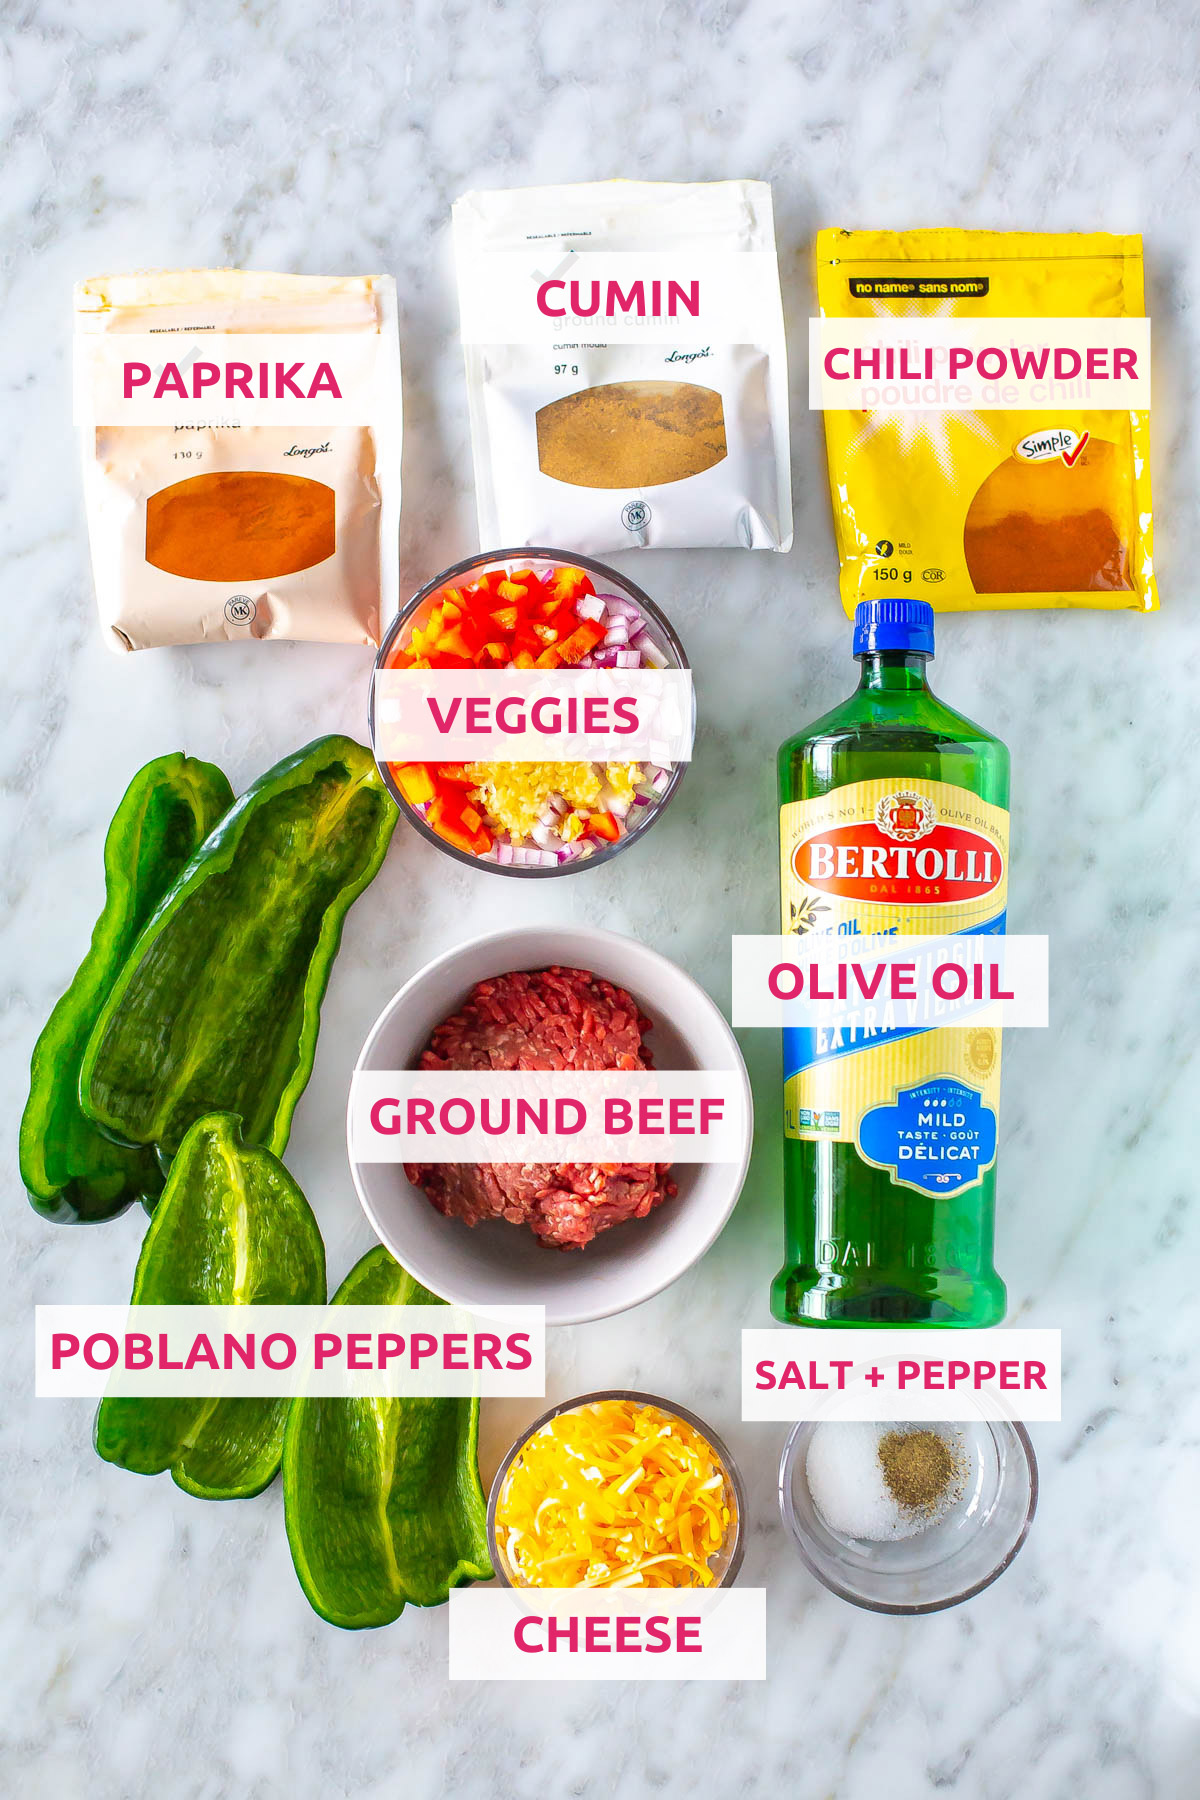 Ingredients for stuffed poblano peppers: poblano peppers, cheese, ground beef, veggies, olive oil, salt, pepper, chili powder, cumin, and paprika.